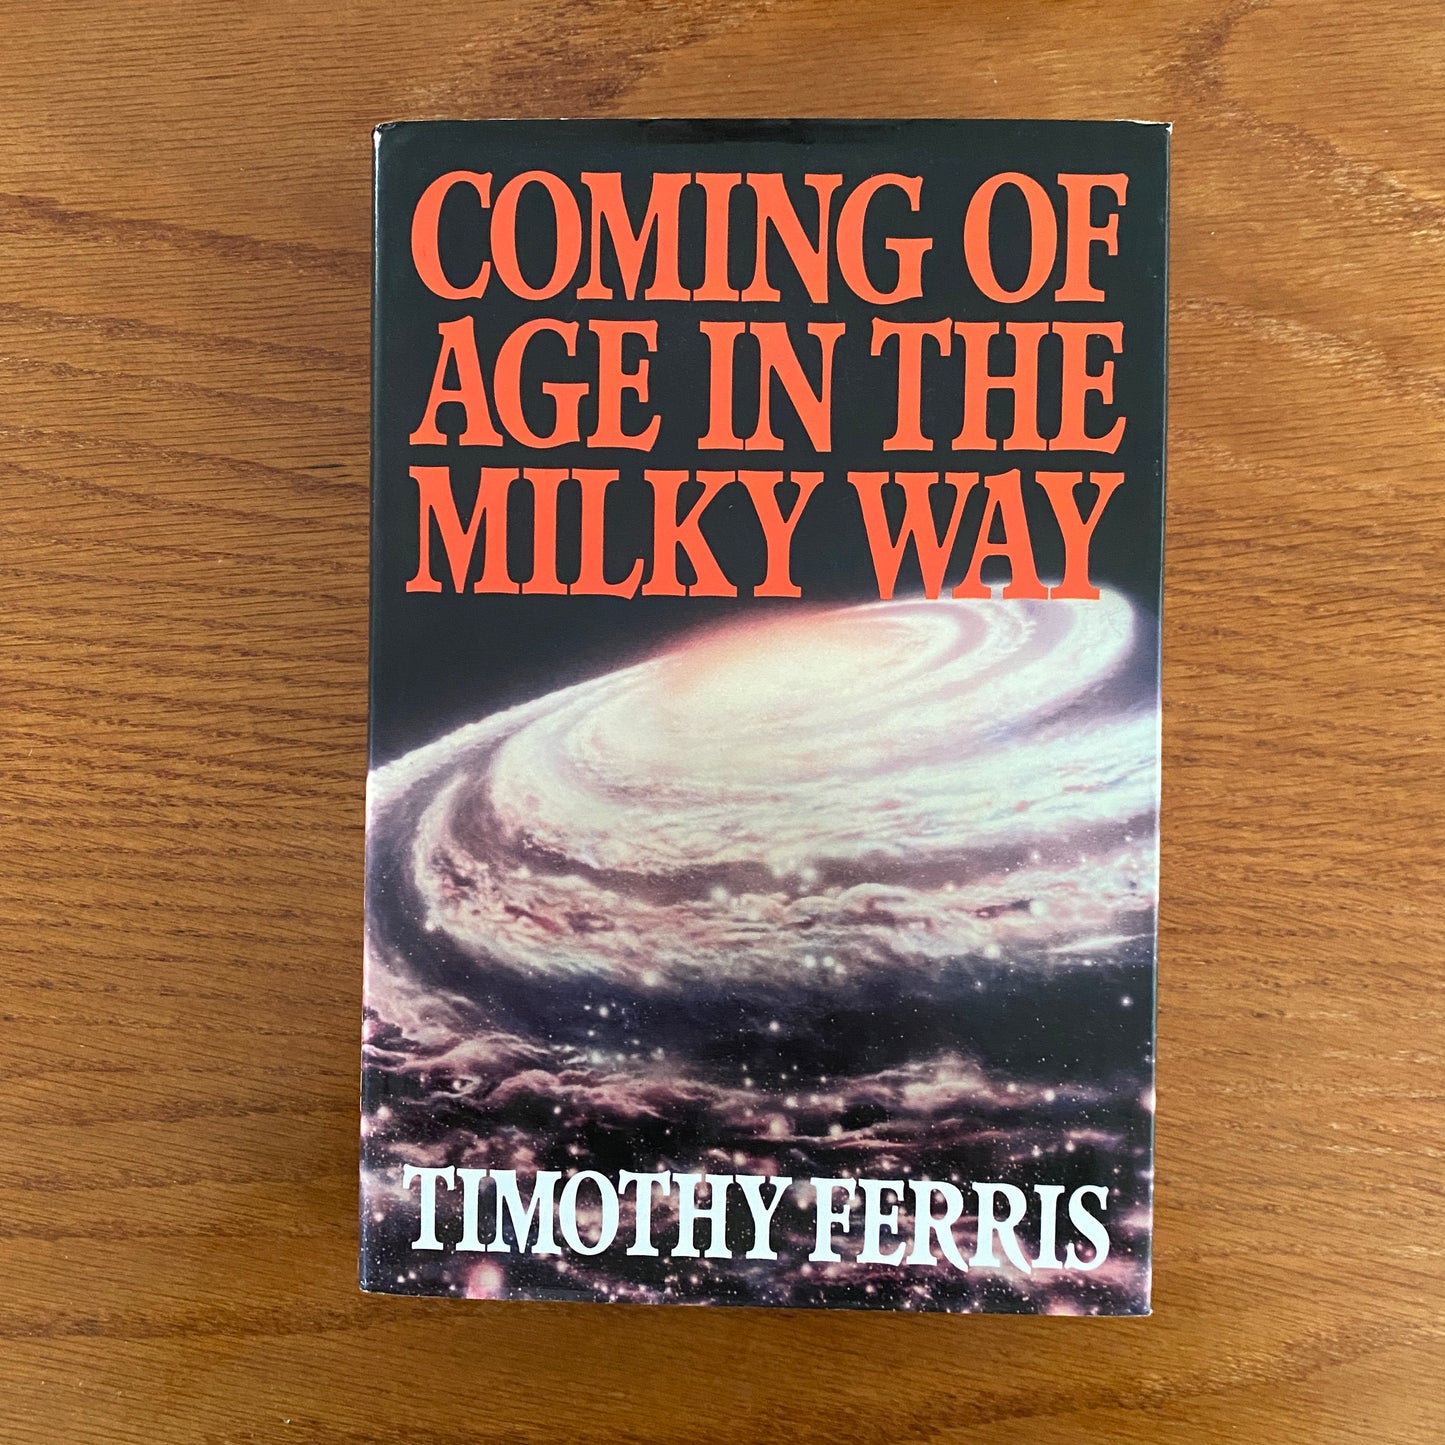 Coming Of Age In The Milky Way - Timothy Ferris